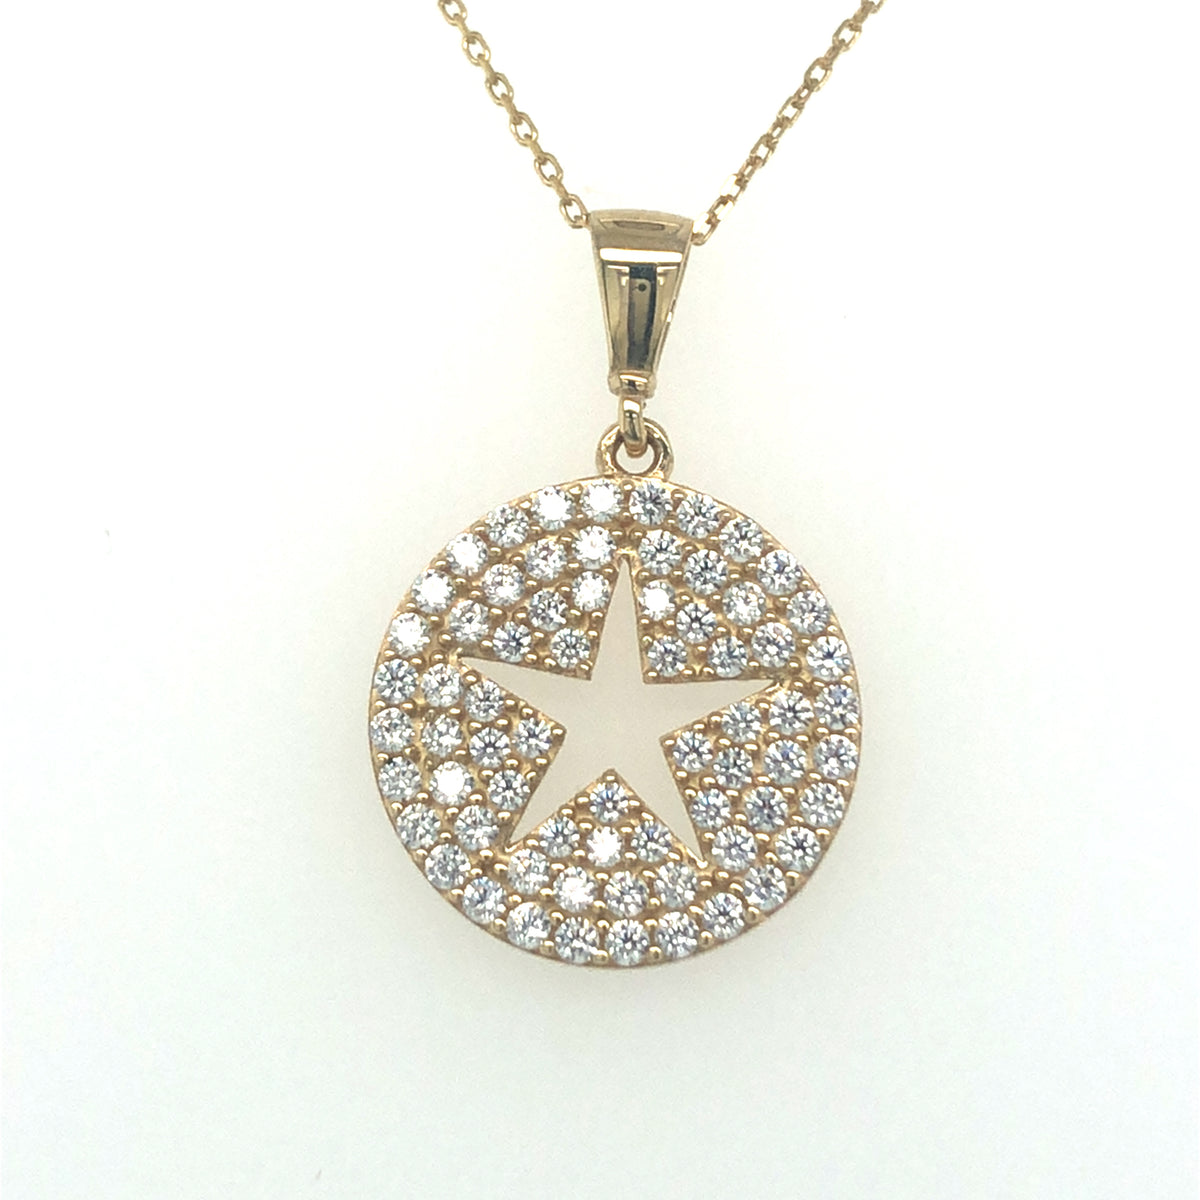 9kt Gold Stone Set Pendant with Star Cut Out Design